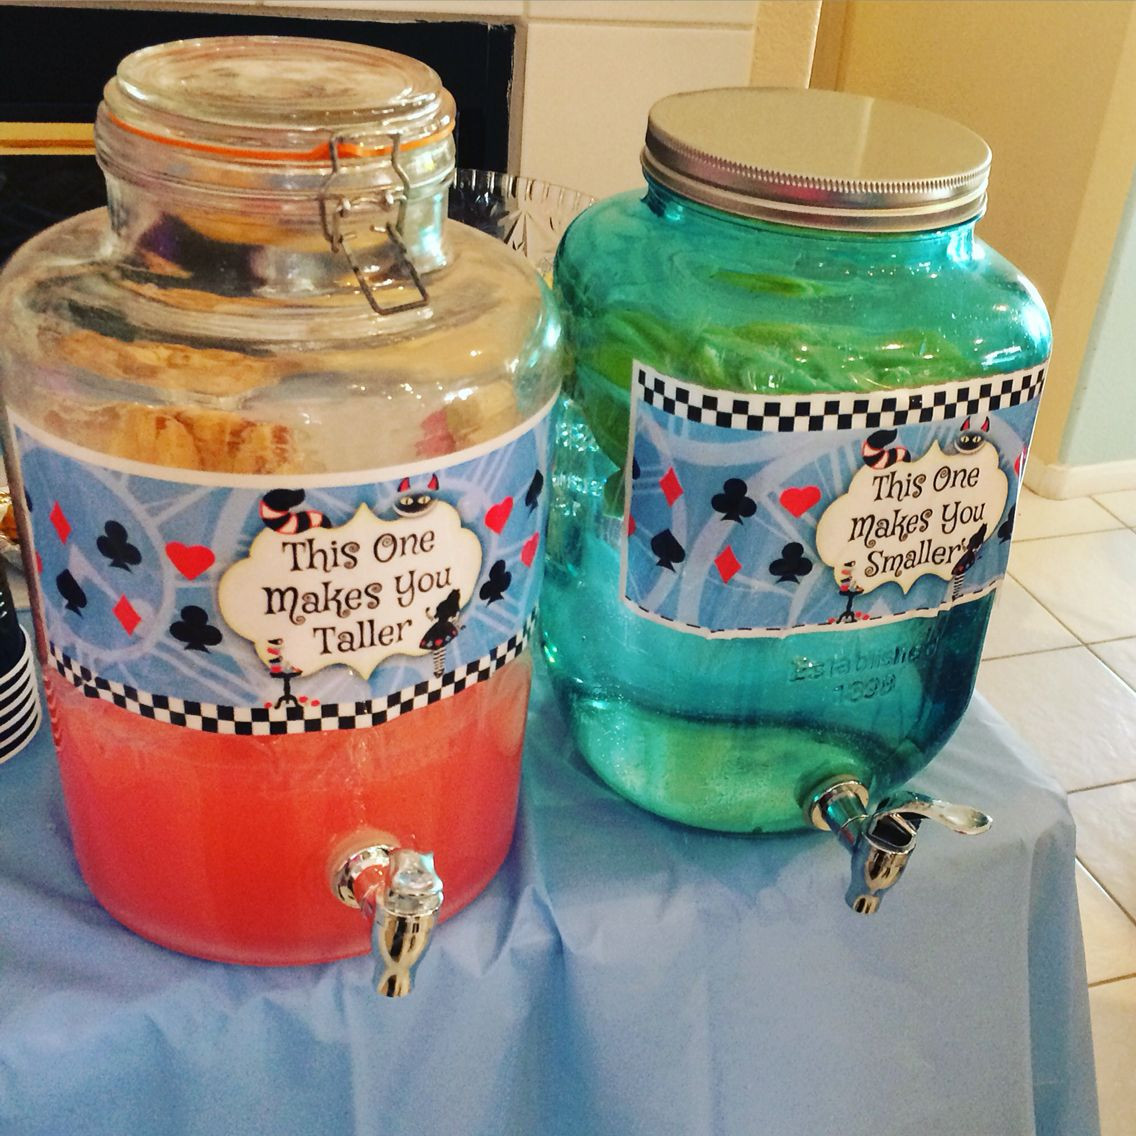 Mad Hatter Tea Party Ideas For Adults
 Alice in Wonderland Mad Hatter tea party in 2019